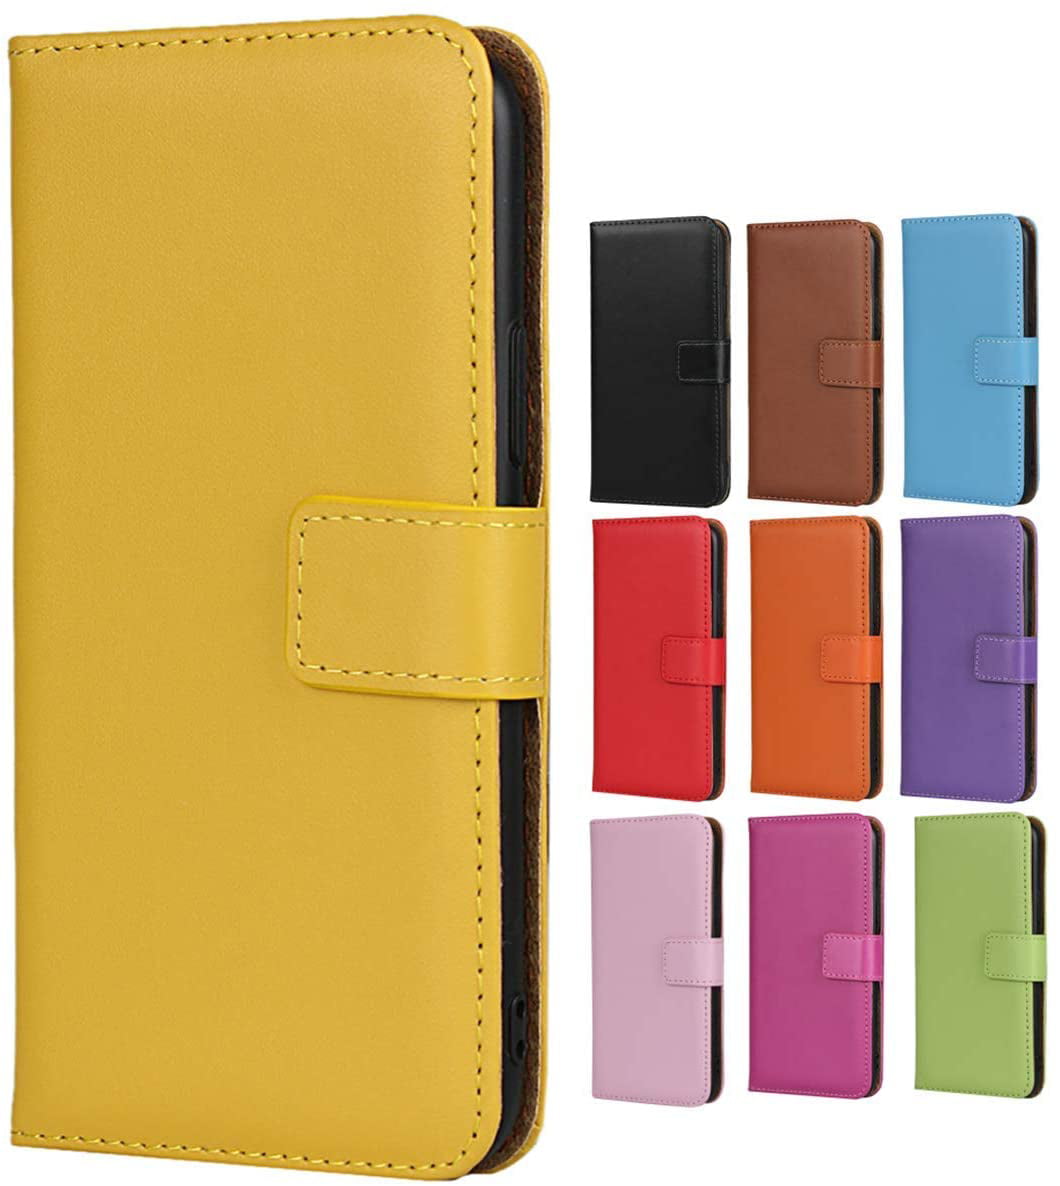 Genuine Leather Folio Flip Wallet Case Cover Book Design with Kickstand Feature & Magnetic Closure & Card Slots/Cash Compartment for iPhone XR-Blue Jaorty for iPhone XR Case